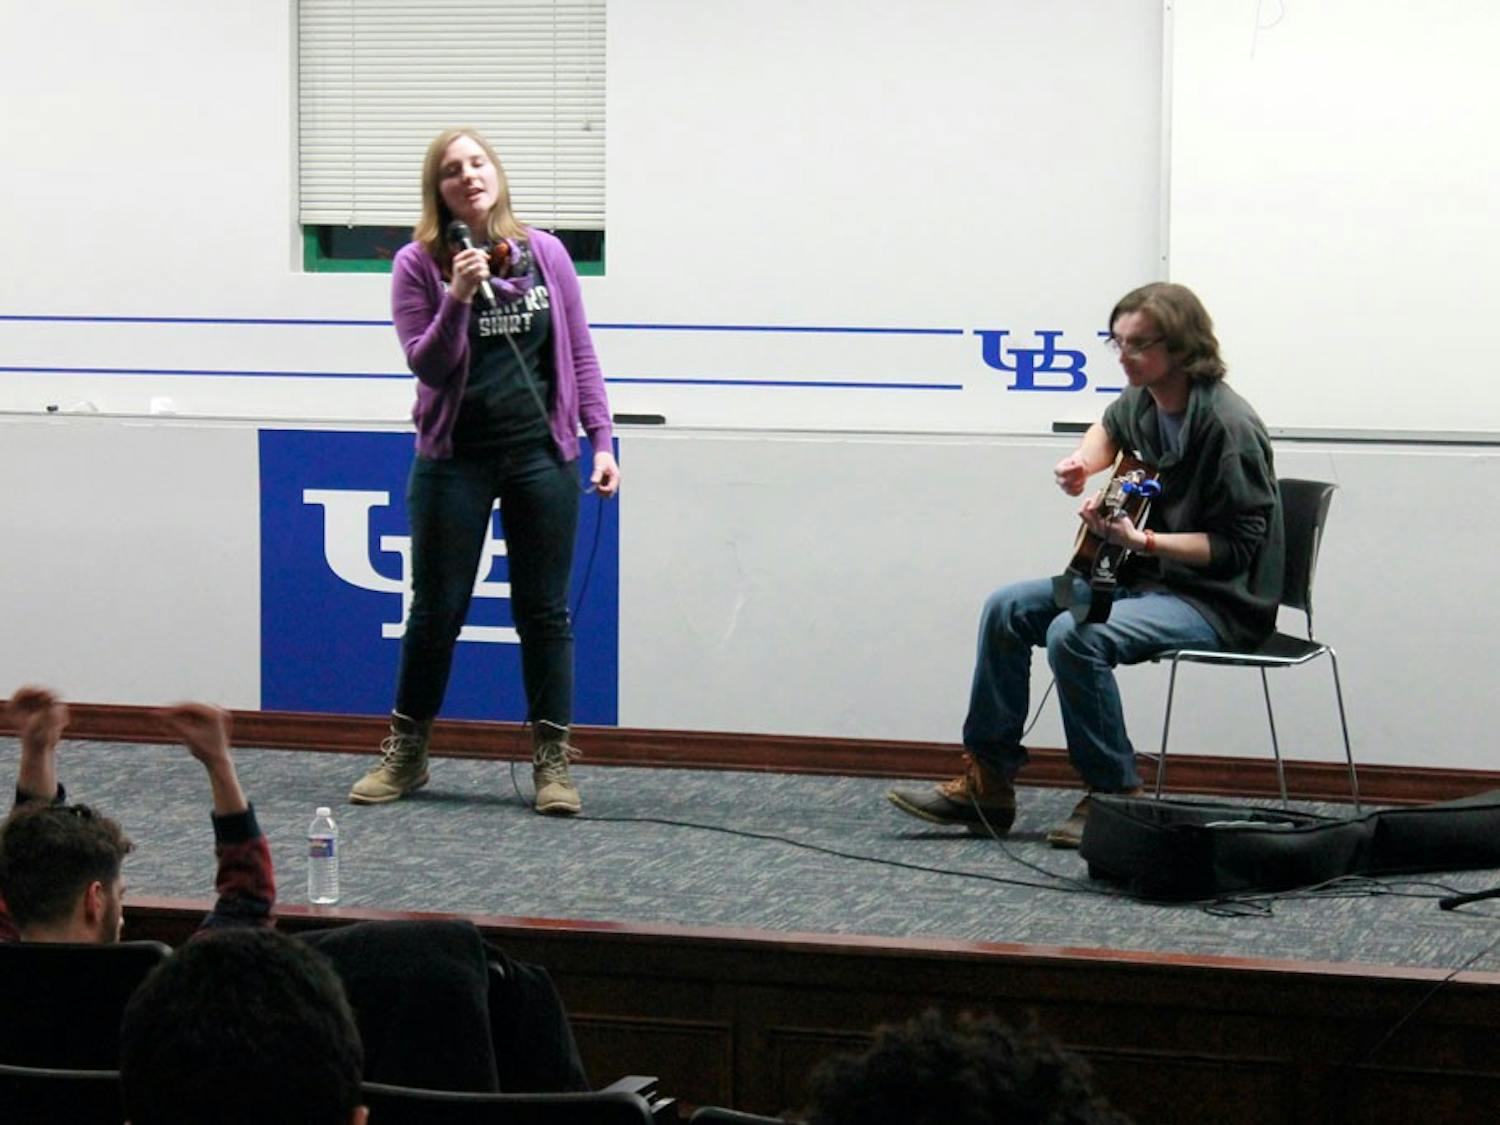 Rachel Sawyer, a senior English major, (left) performed a rendition of Amy Winehouse’s “Valerie” on stage at the UB Improv’s Open Mic Night Wednesday night.